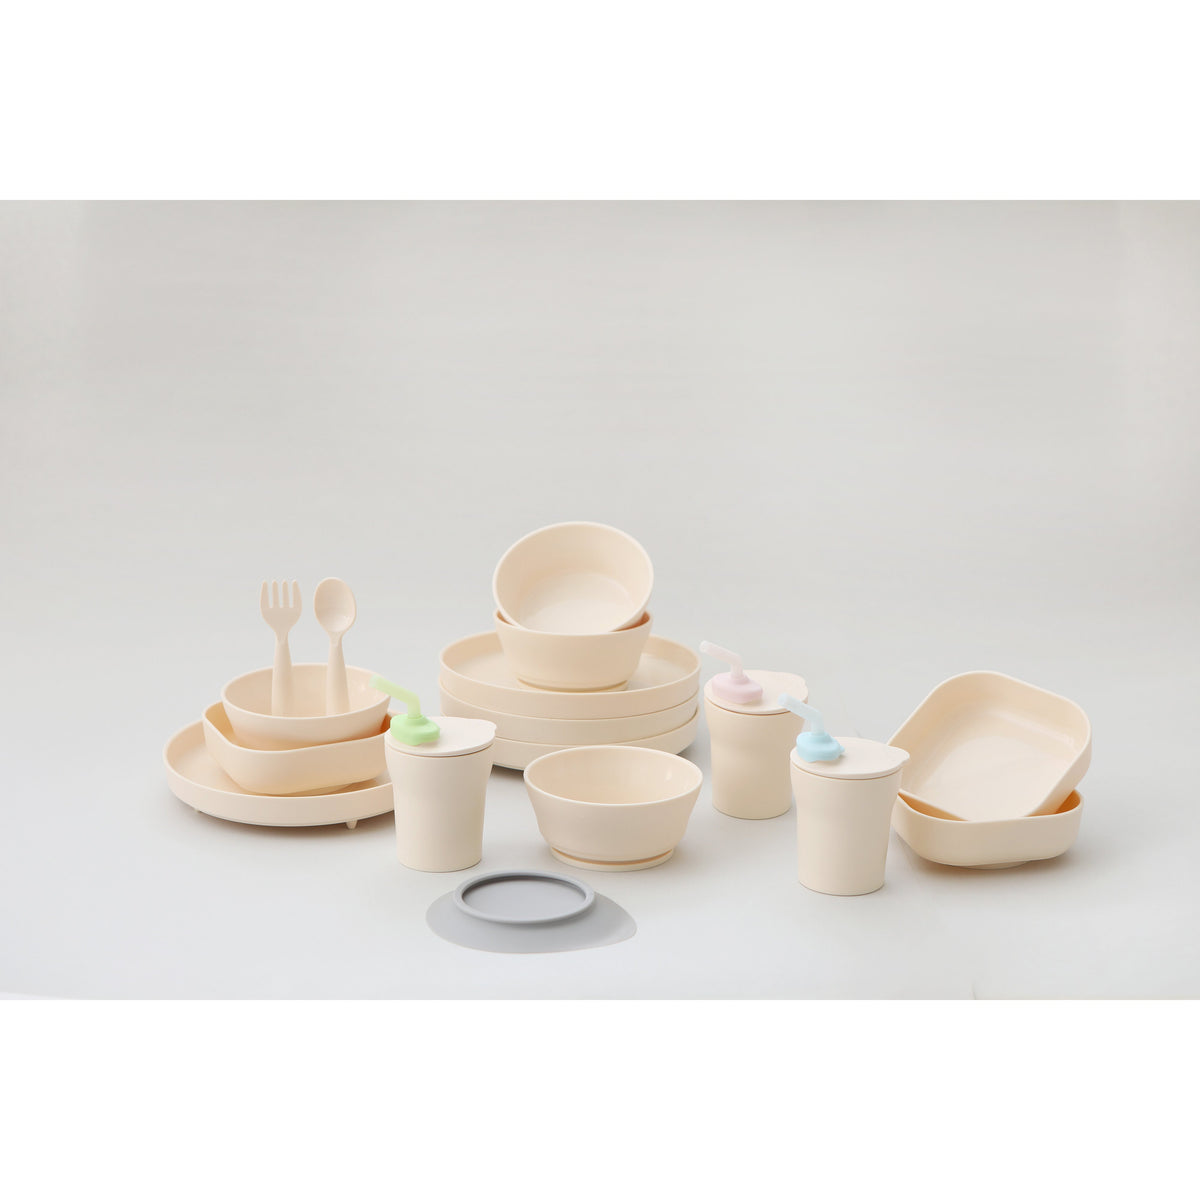 Miniware First Bite Set - PLA Cereal Suction Bowl Vanilla + Silicone Spoon and Cover in KeyLime